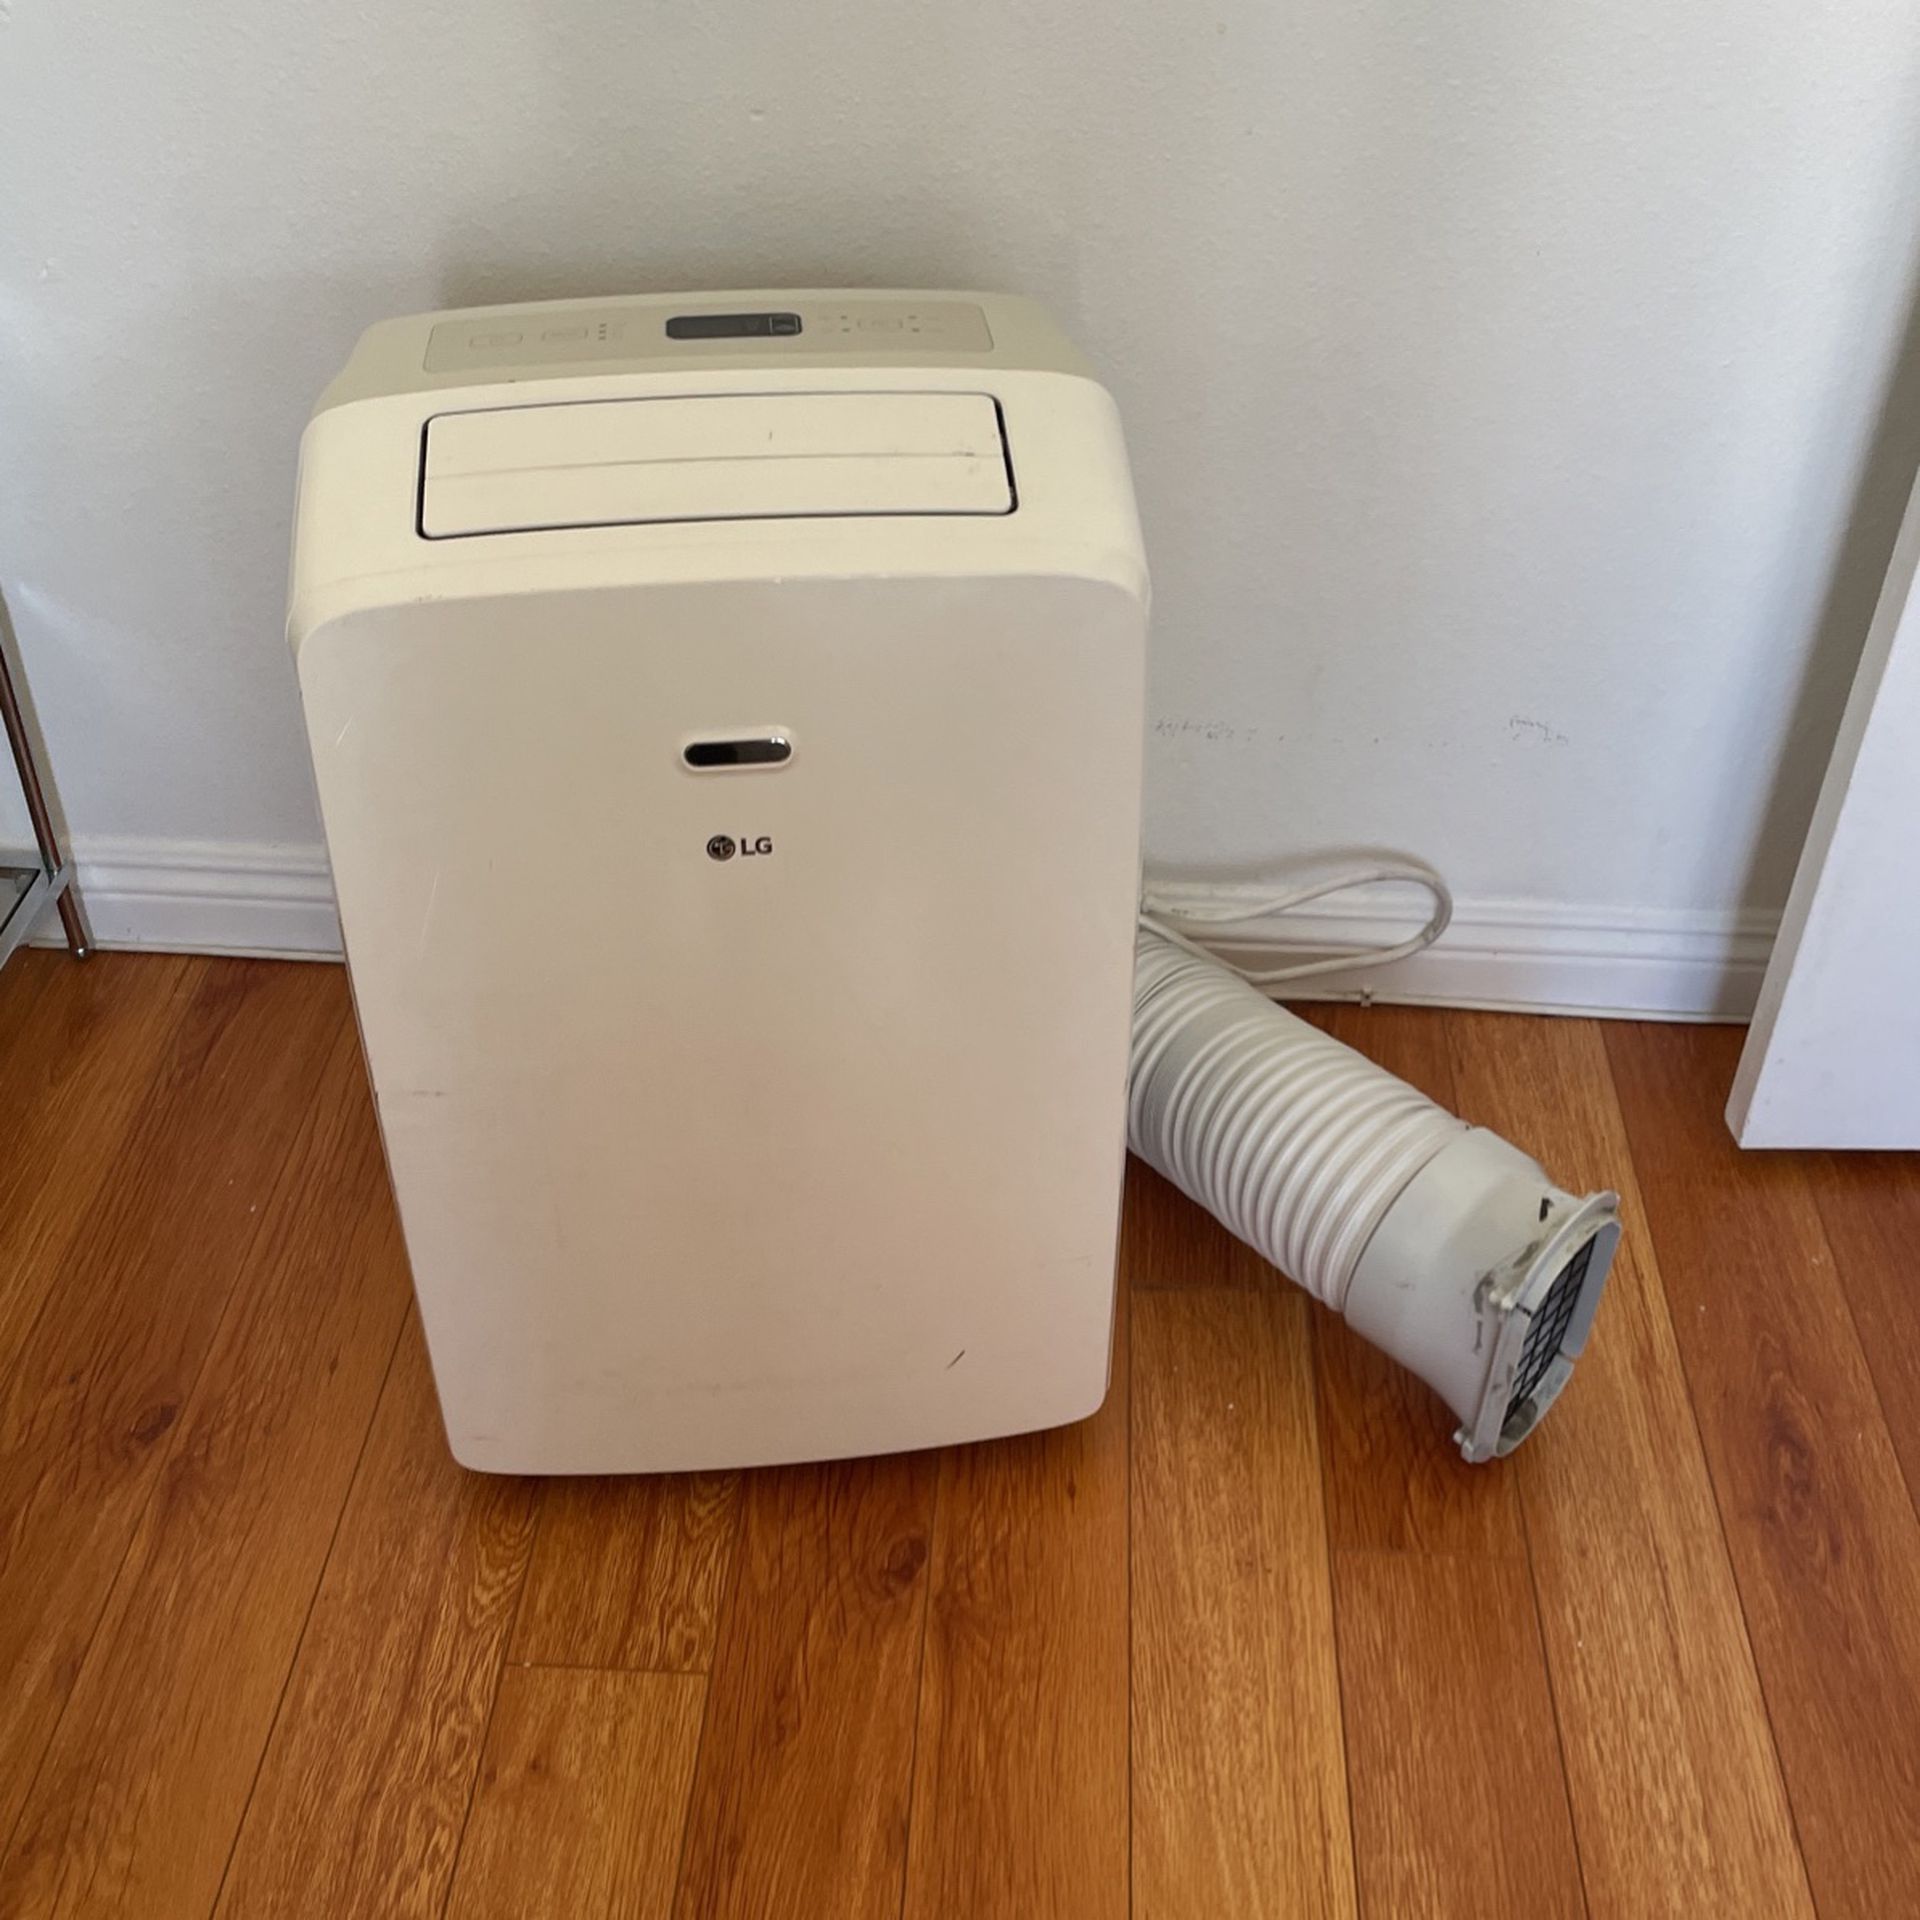 Portable Air Conditioner With Dehumidifier Function - LG